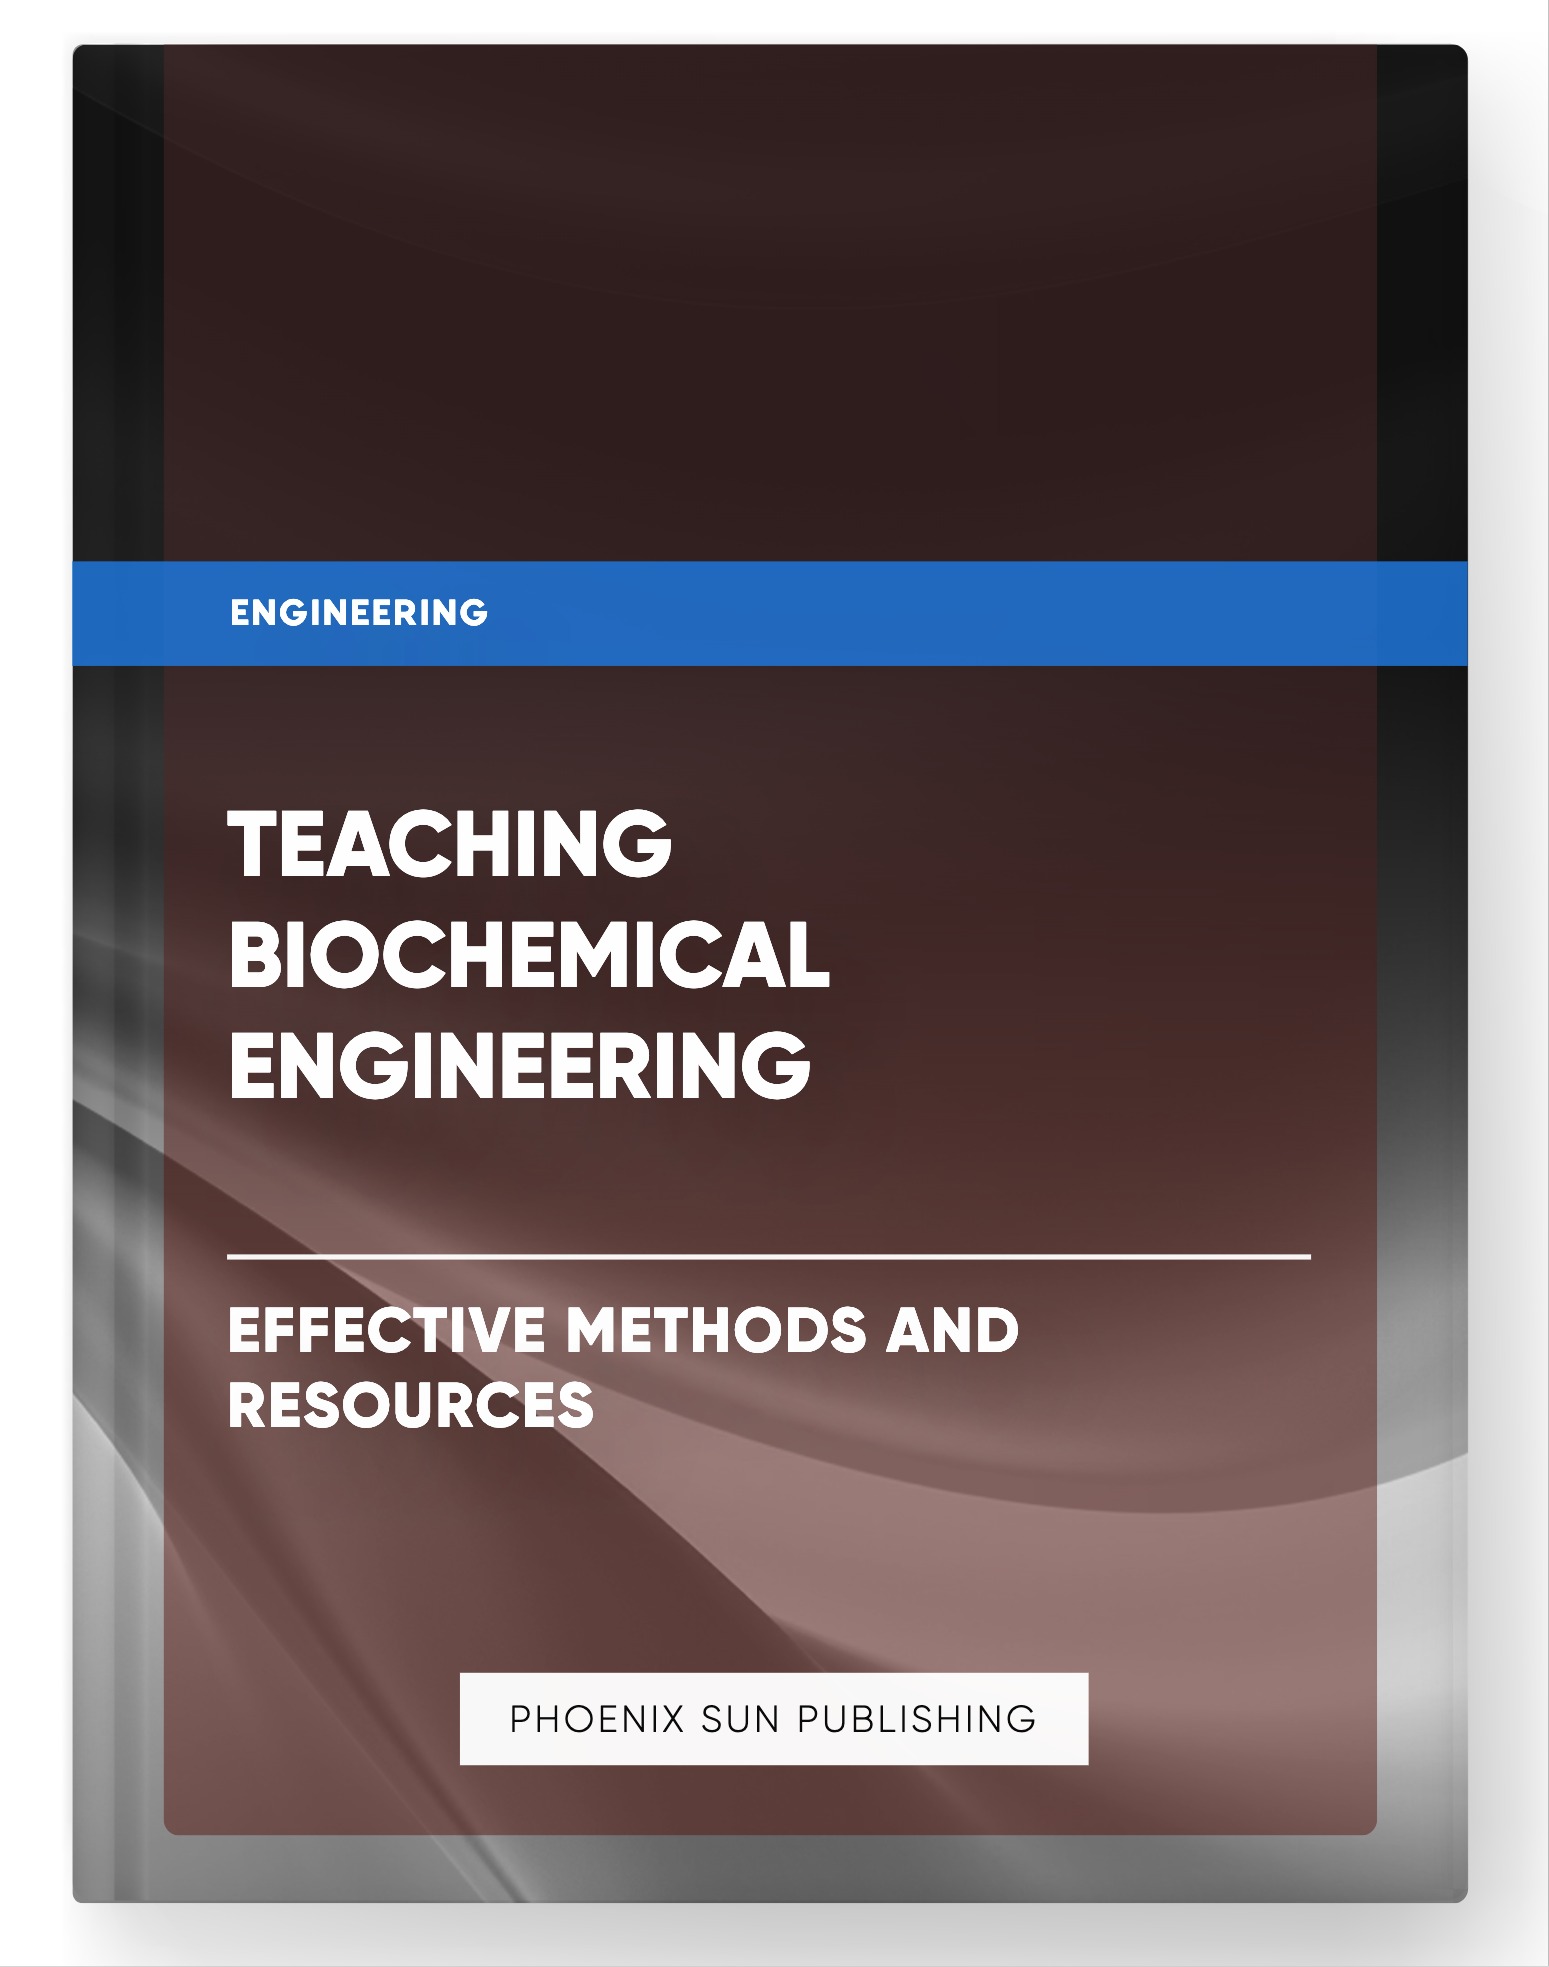 Teaching Biochemical Engineering – Effective Methods and Resources